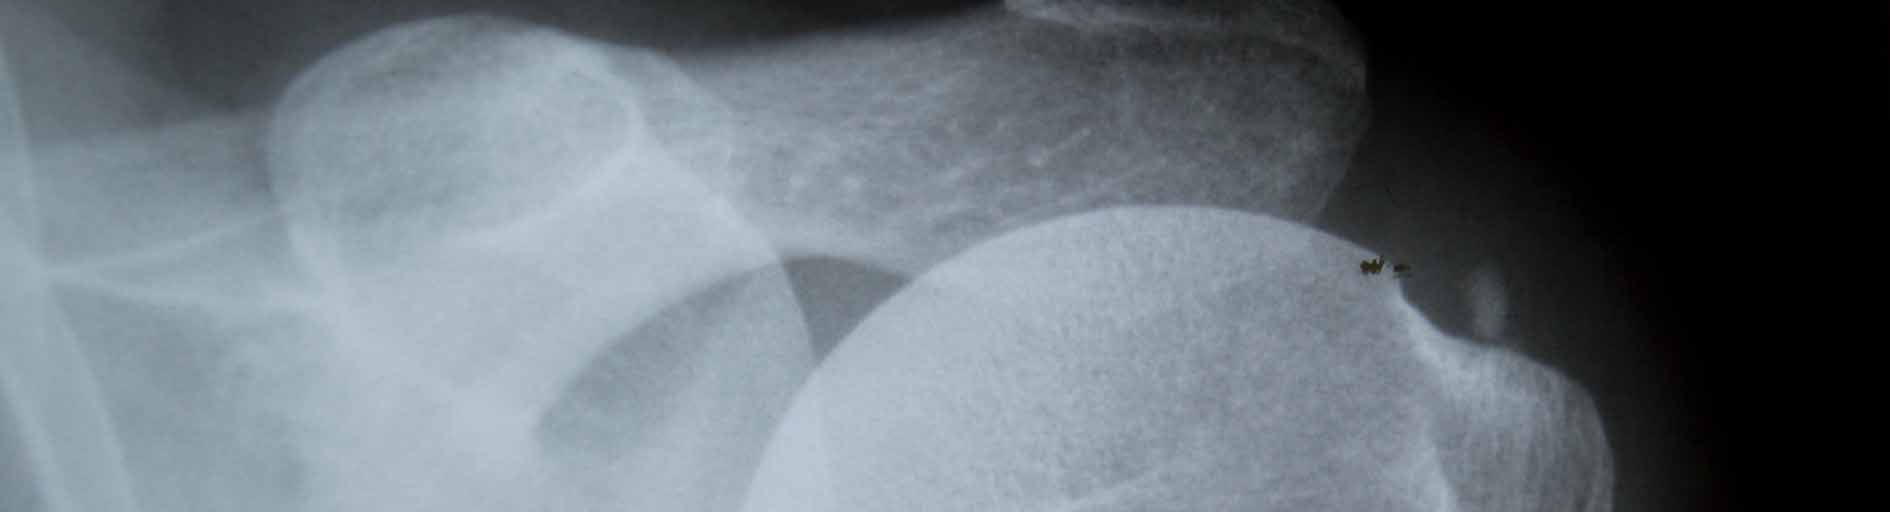 shoulder xray with calcific tendonitis